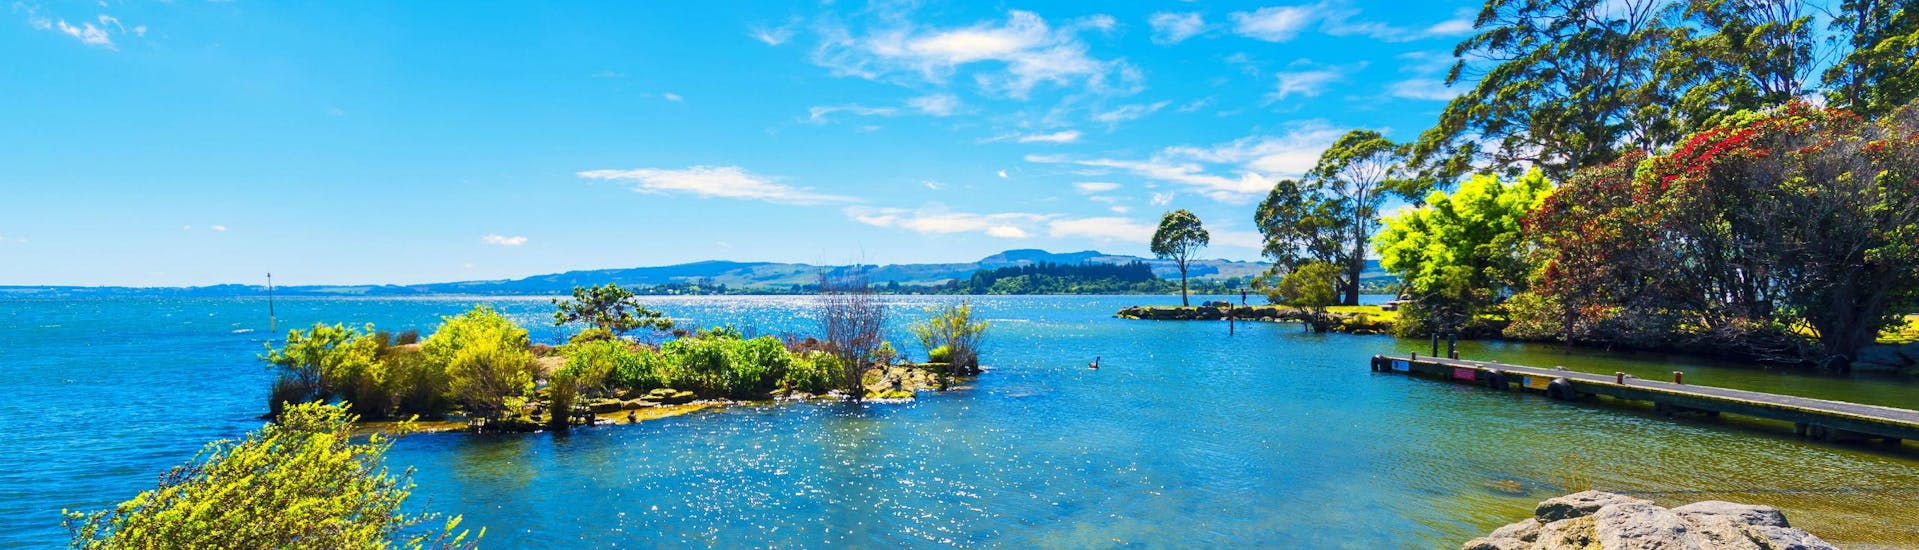 An image of one of the Rotorua Lakes near Okere Falls, a popular place to go Stand Up Paddleboarding.